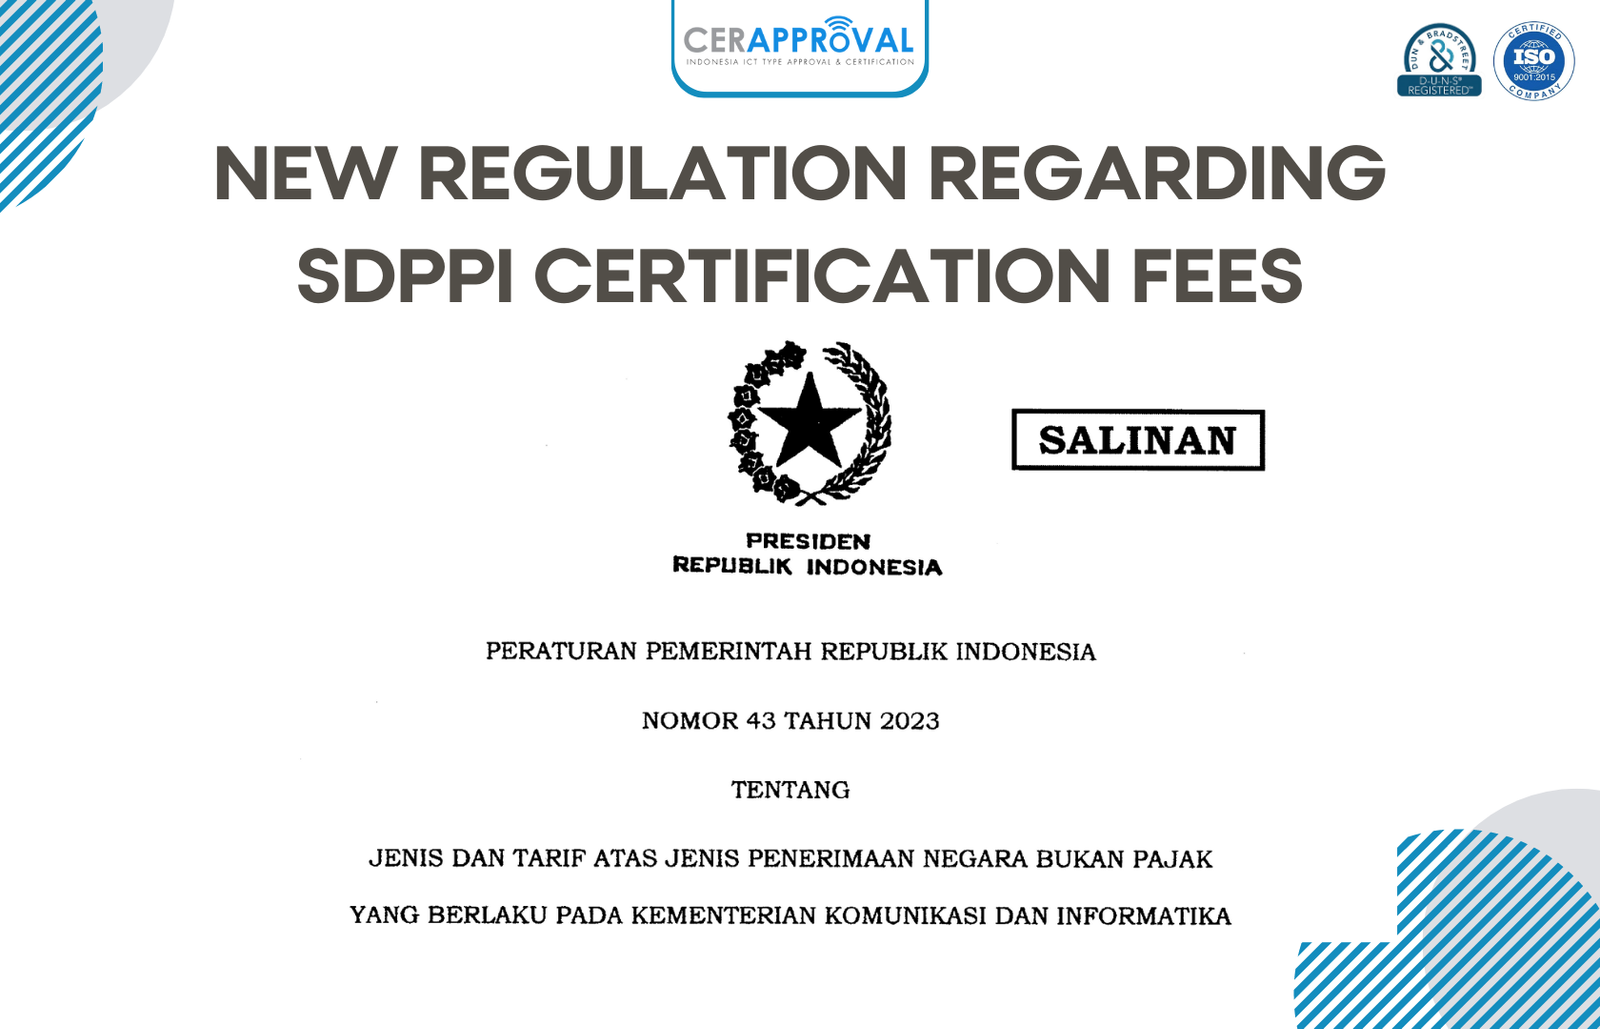 Government Regulation Number 43 Year 2023: Regulation on New Fees for Issuing SDPPI Certificates